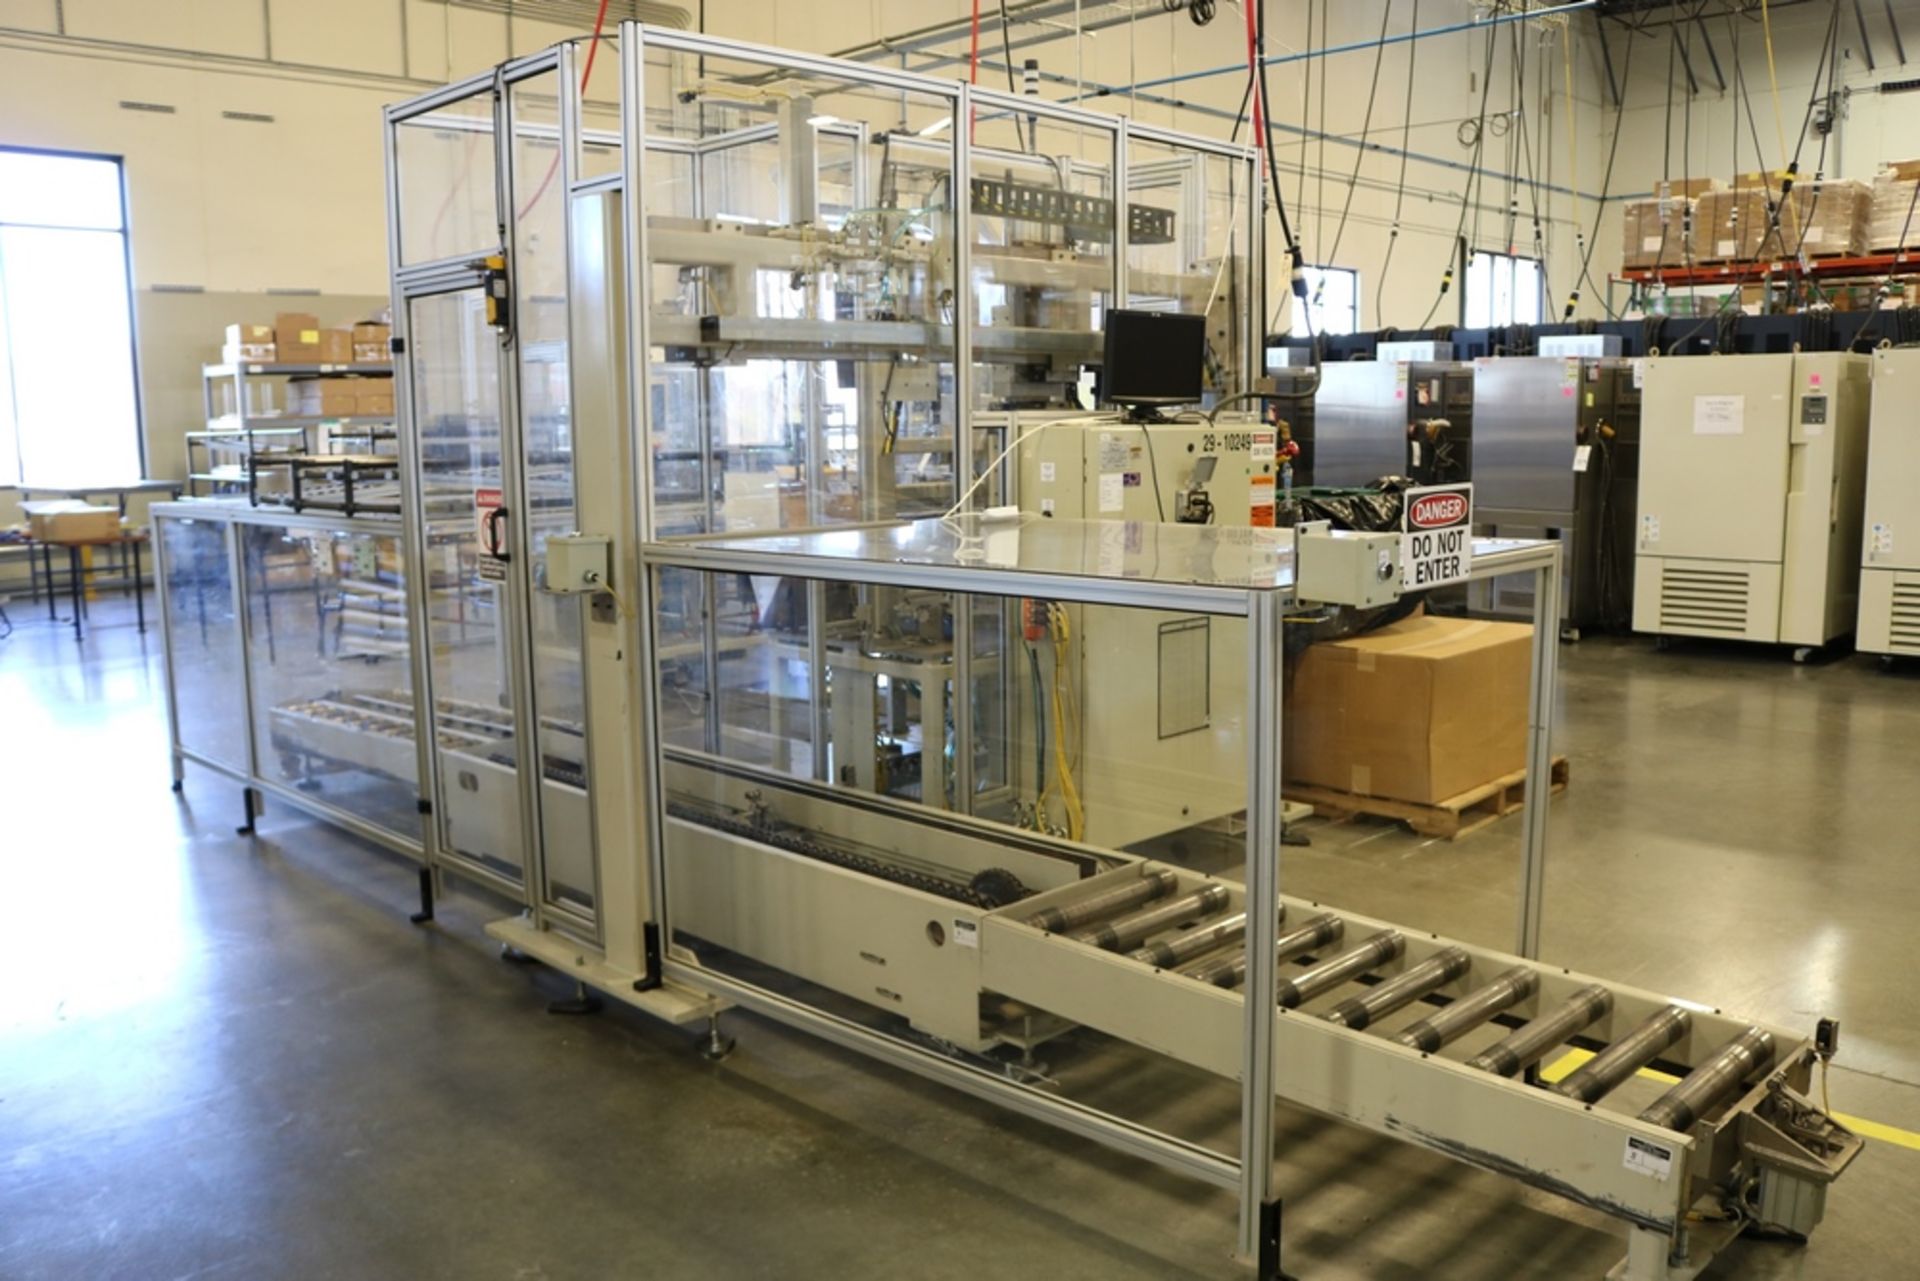 3 Station Automated Module Assembly Line Built by Pro Tech Machine for Enerdel Module Assembly - Image 38 of 48